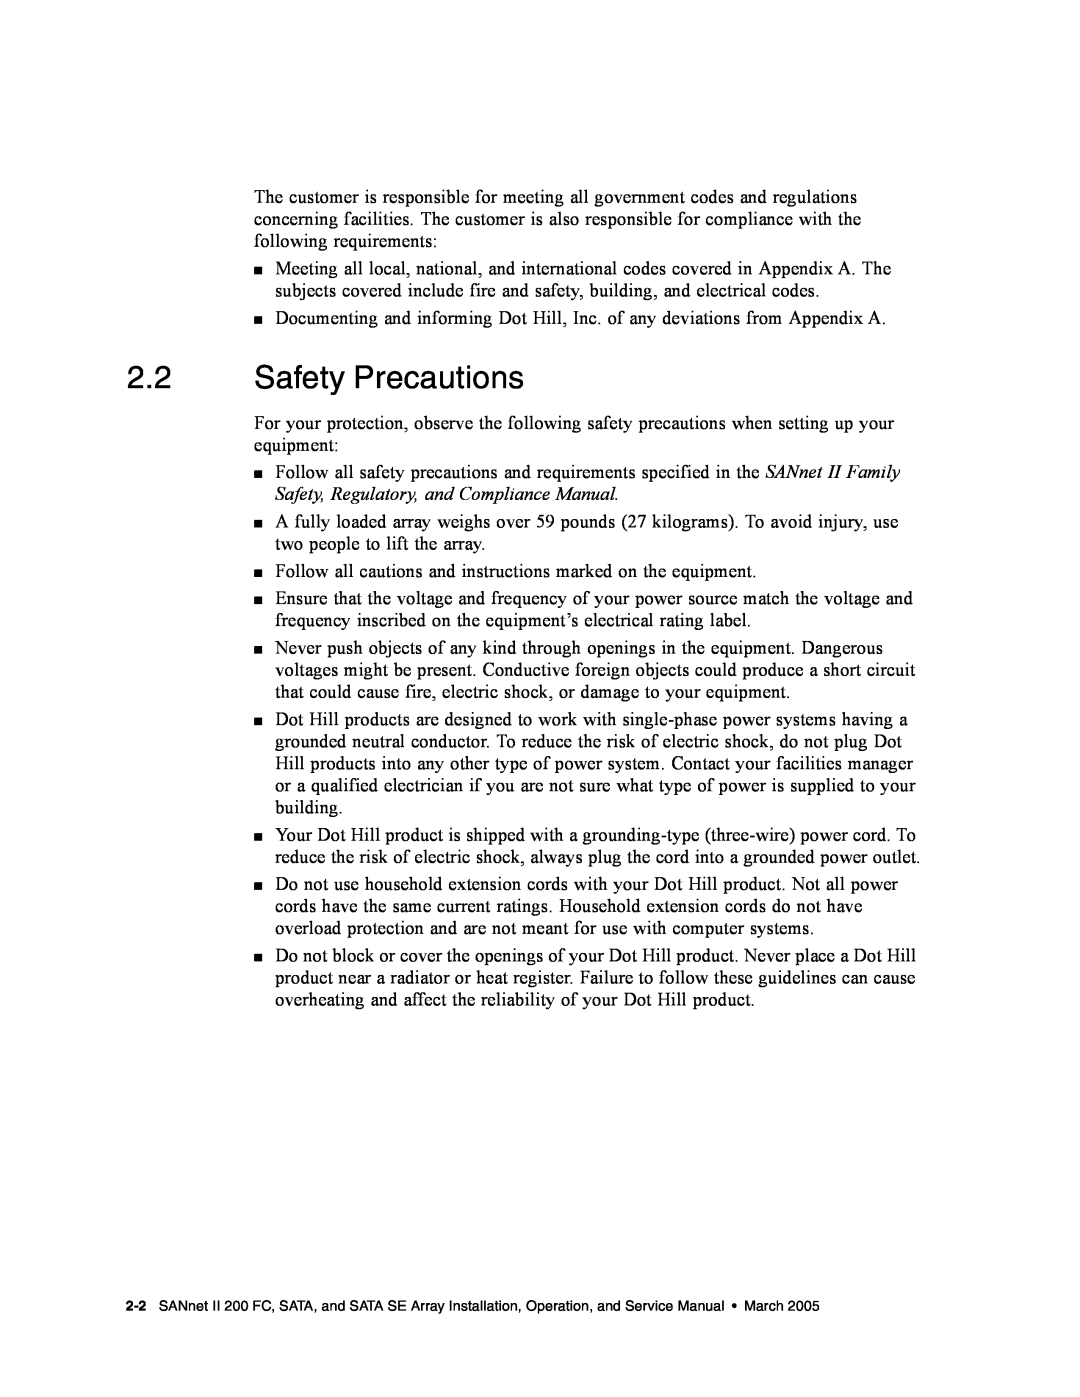 Dot Hill Systems II 200 FC service manual Safety Precautions 